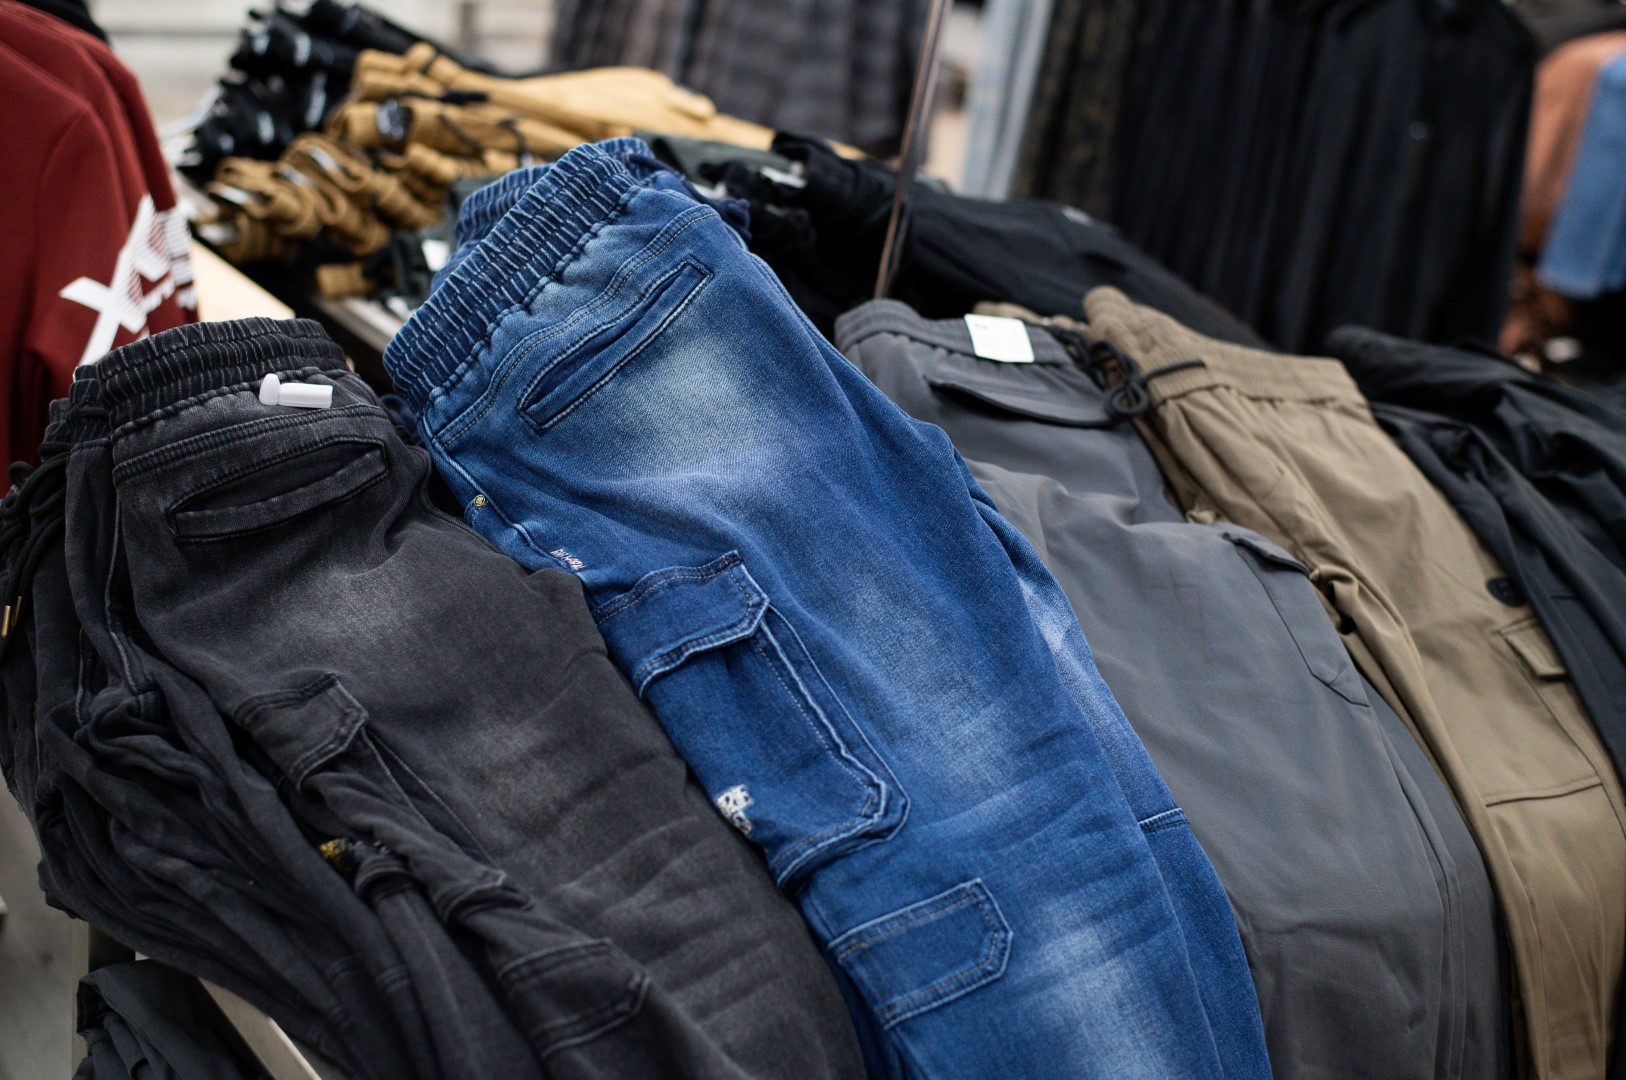 A variety of trousers displayed in a store, including blue jeans and several pairs in shades of gray and black. the focus is on the detailed textures of the fabrics.